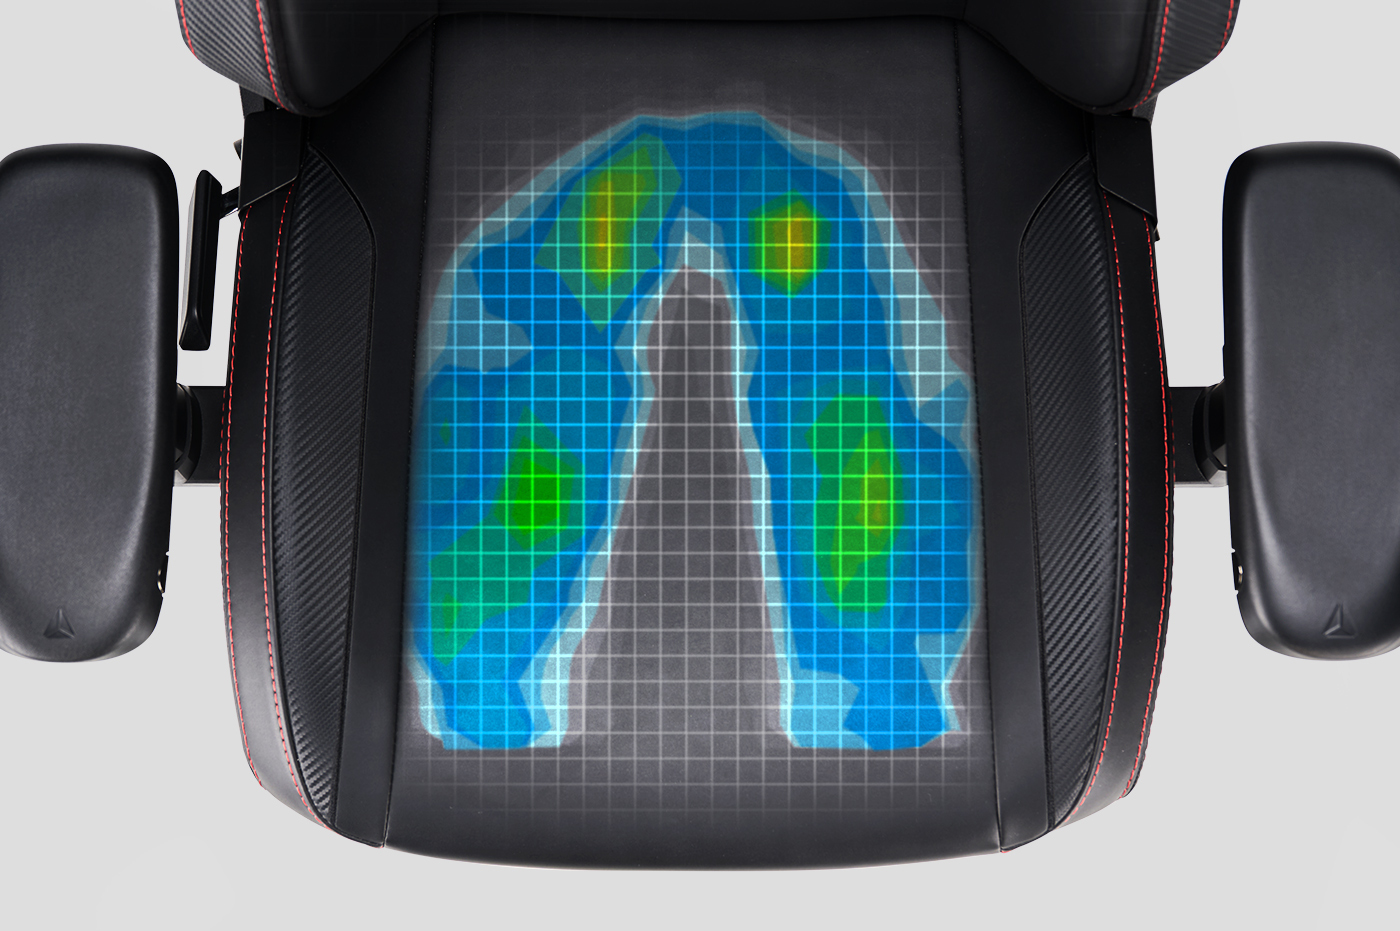 Even pressure distribution on foam gaming chair